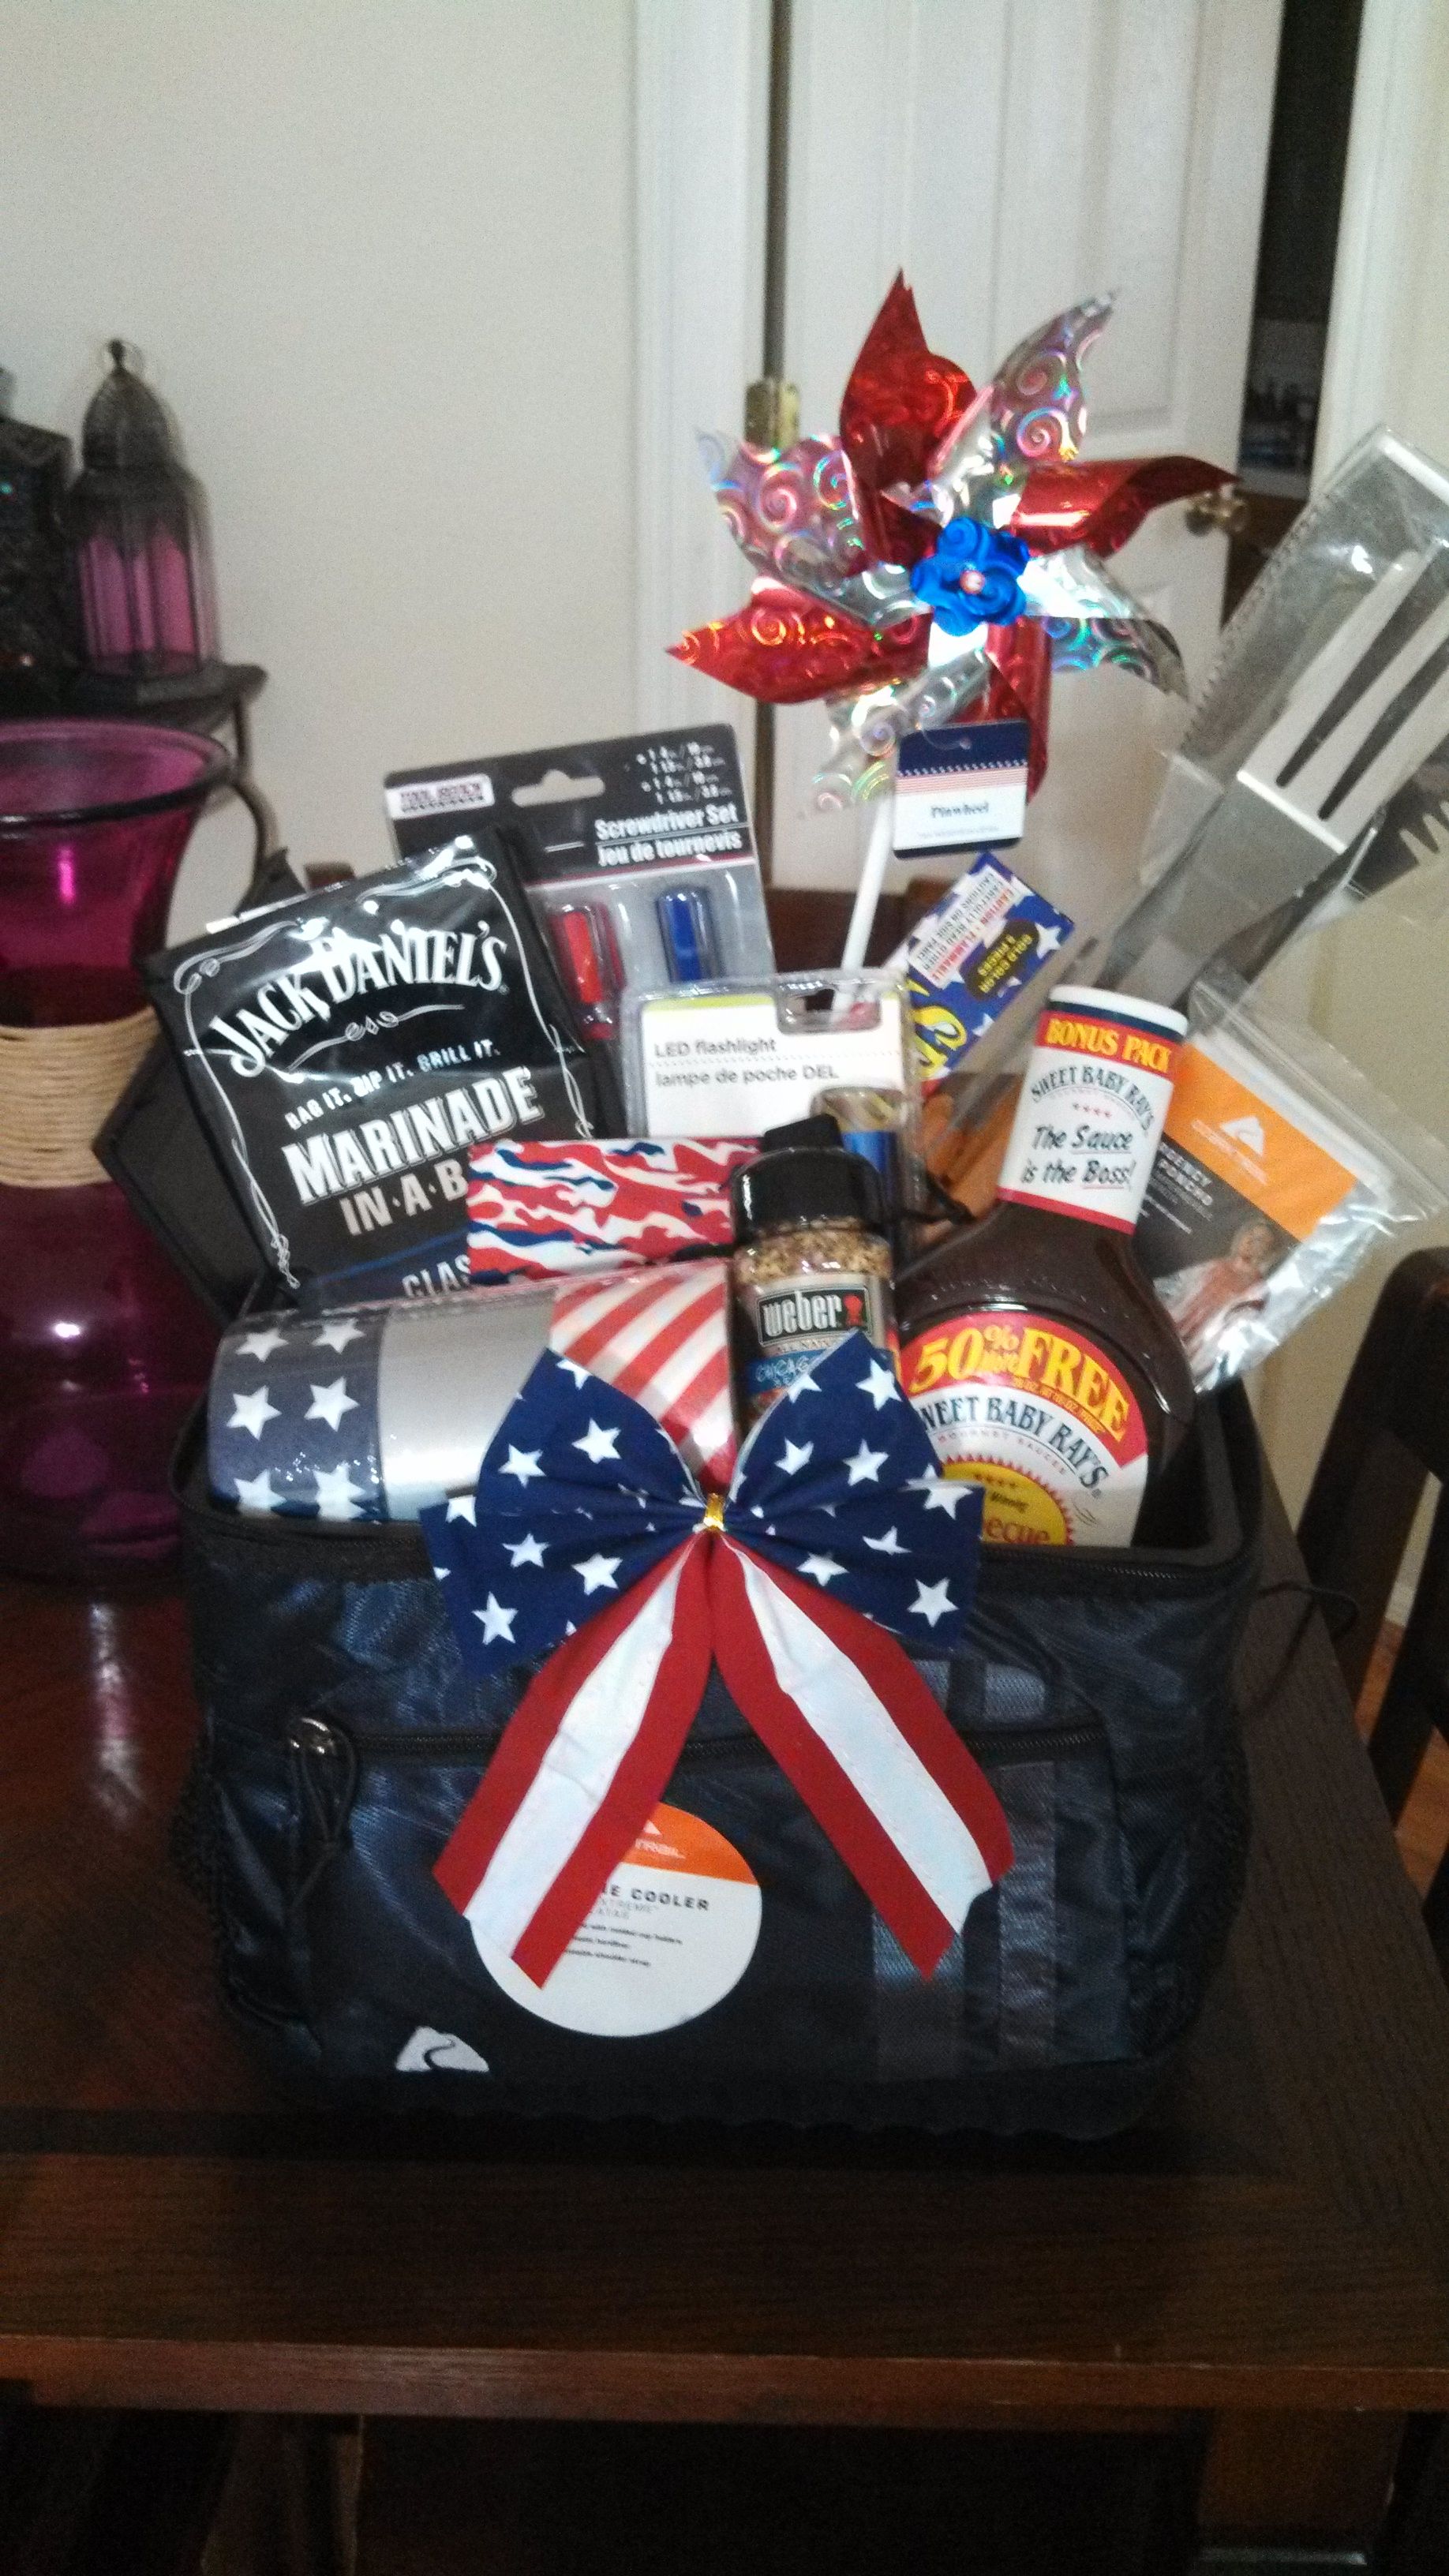 4th of July gift cooler under $30.00 | Fundraiser baskets, Themed gift